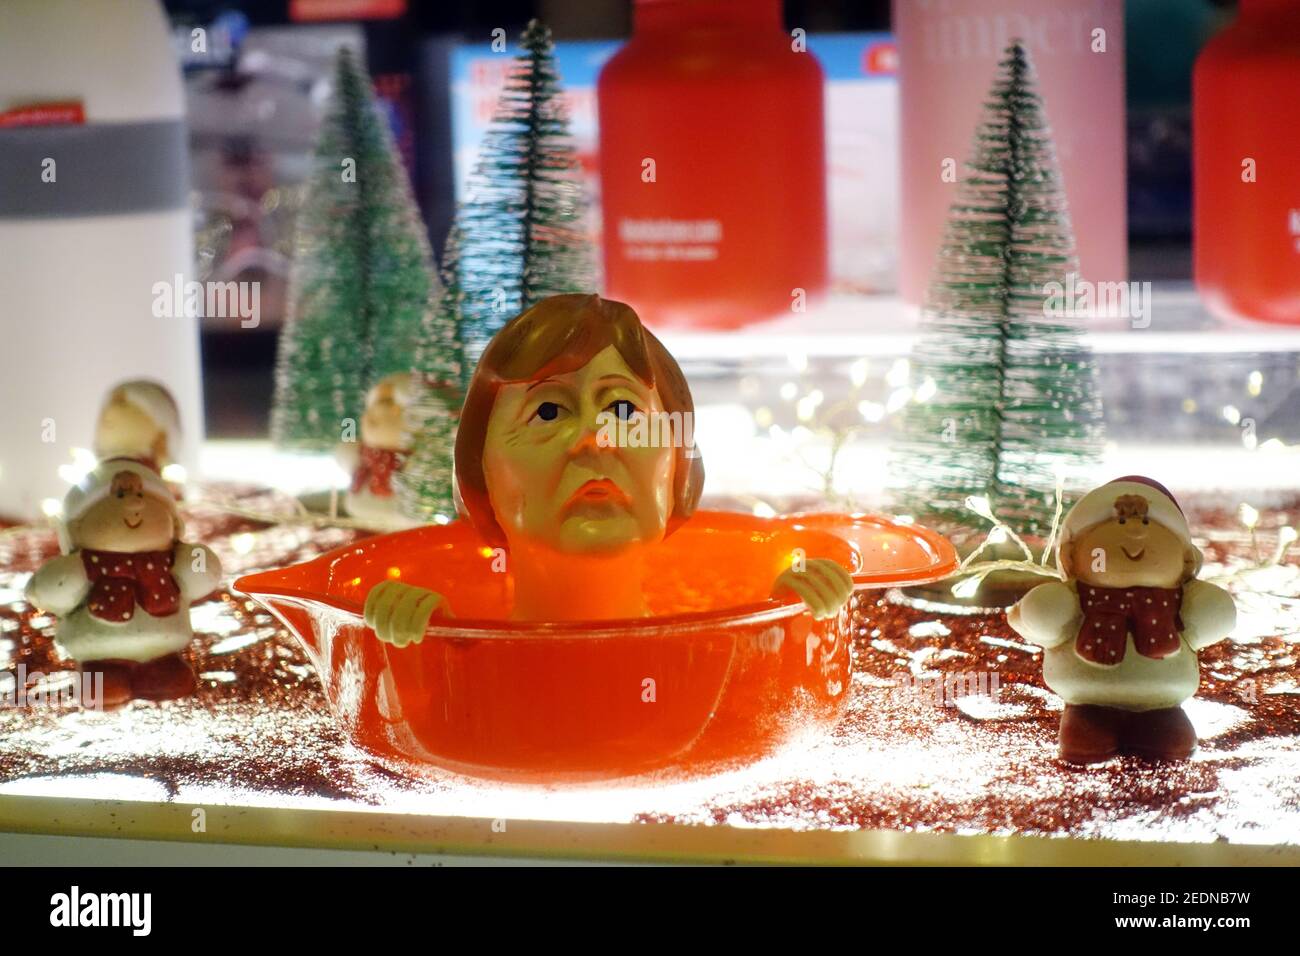 19.11.2020, Berlin, , Germany - Lemon squeezer with the face of German Chancellor Angela Merkel stands in a shop window.. 00S201119D844CAROEX.JPG [MOD Stock Photo